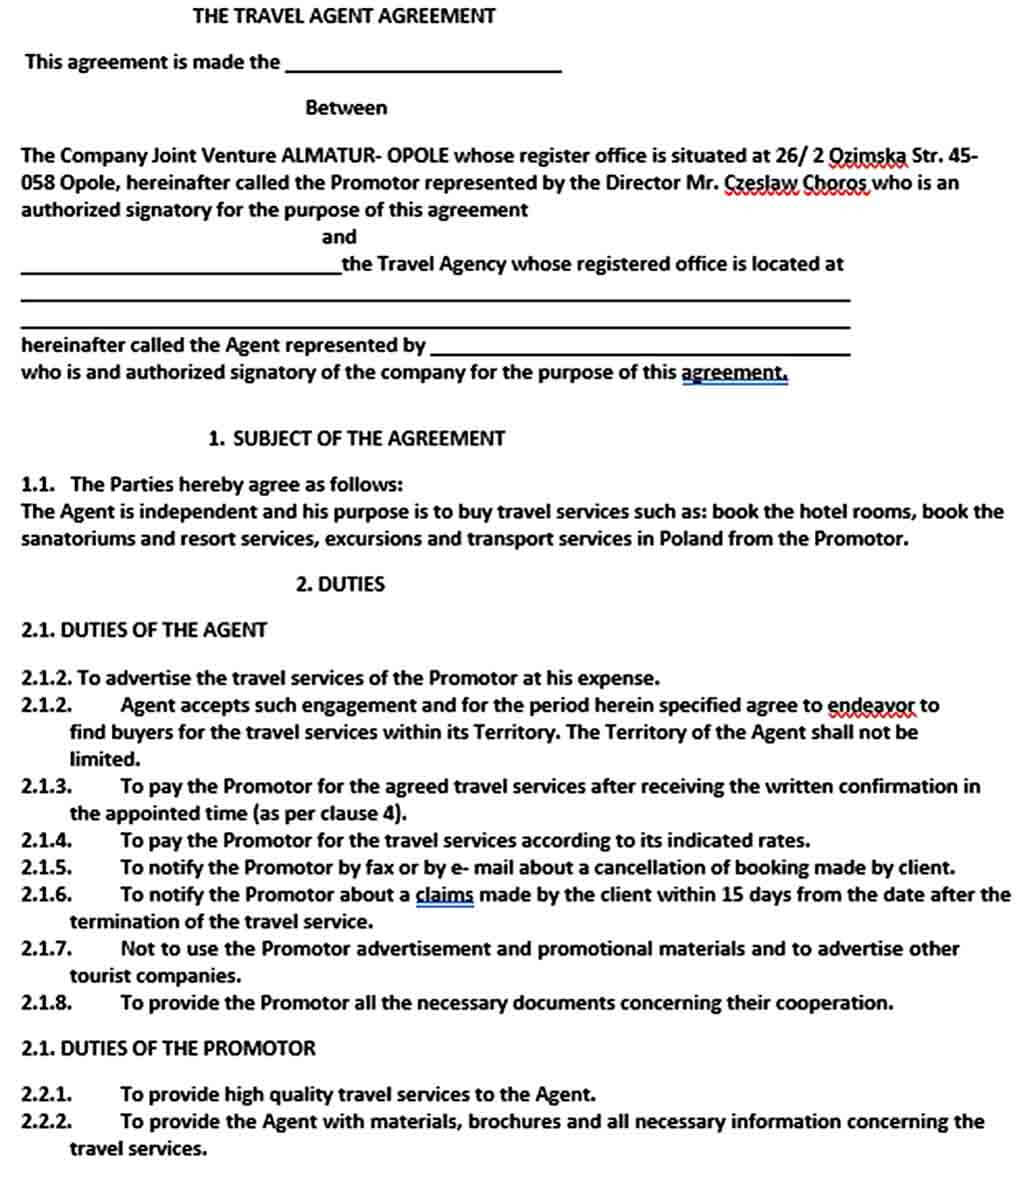 Sample Travel Agent Agreement Template